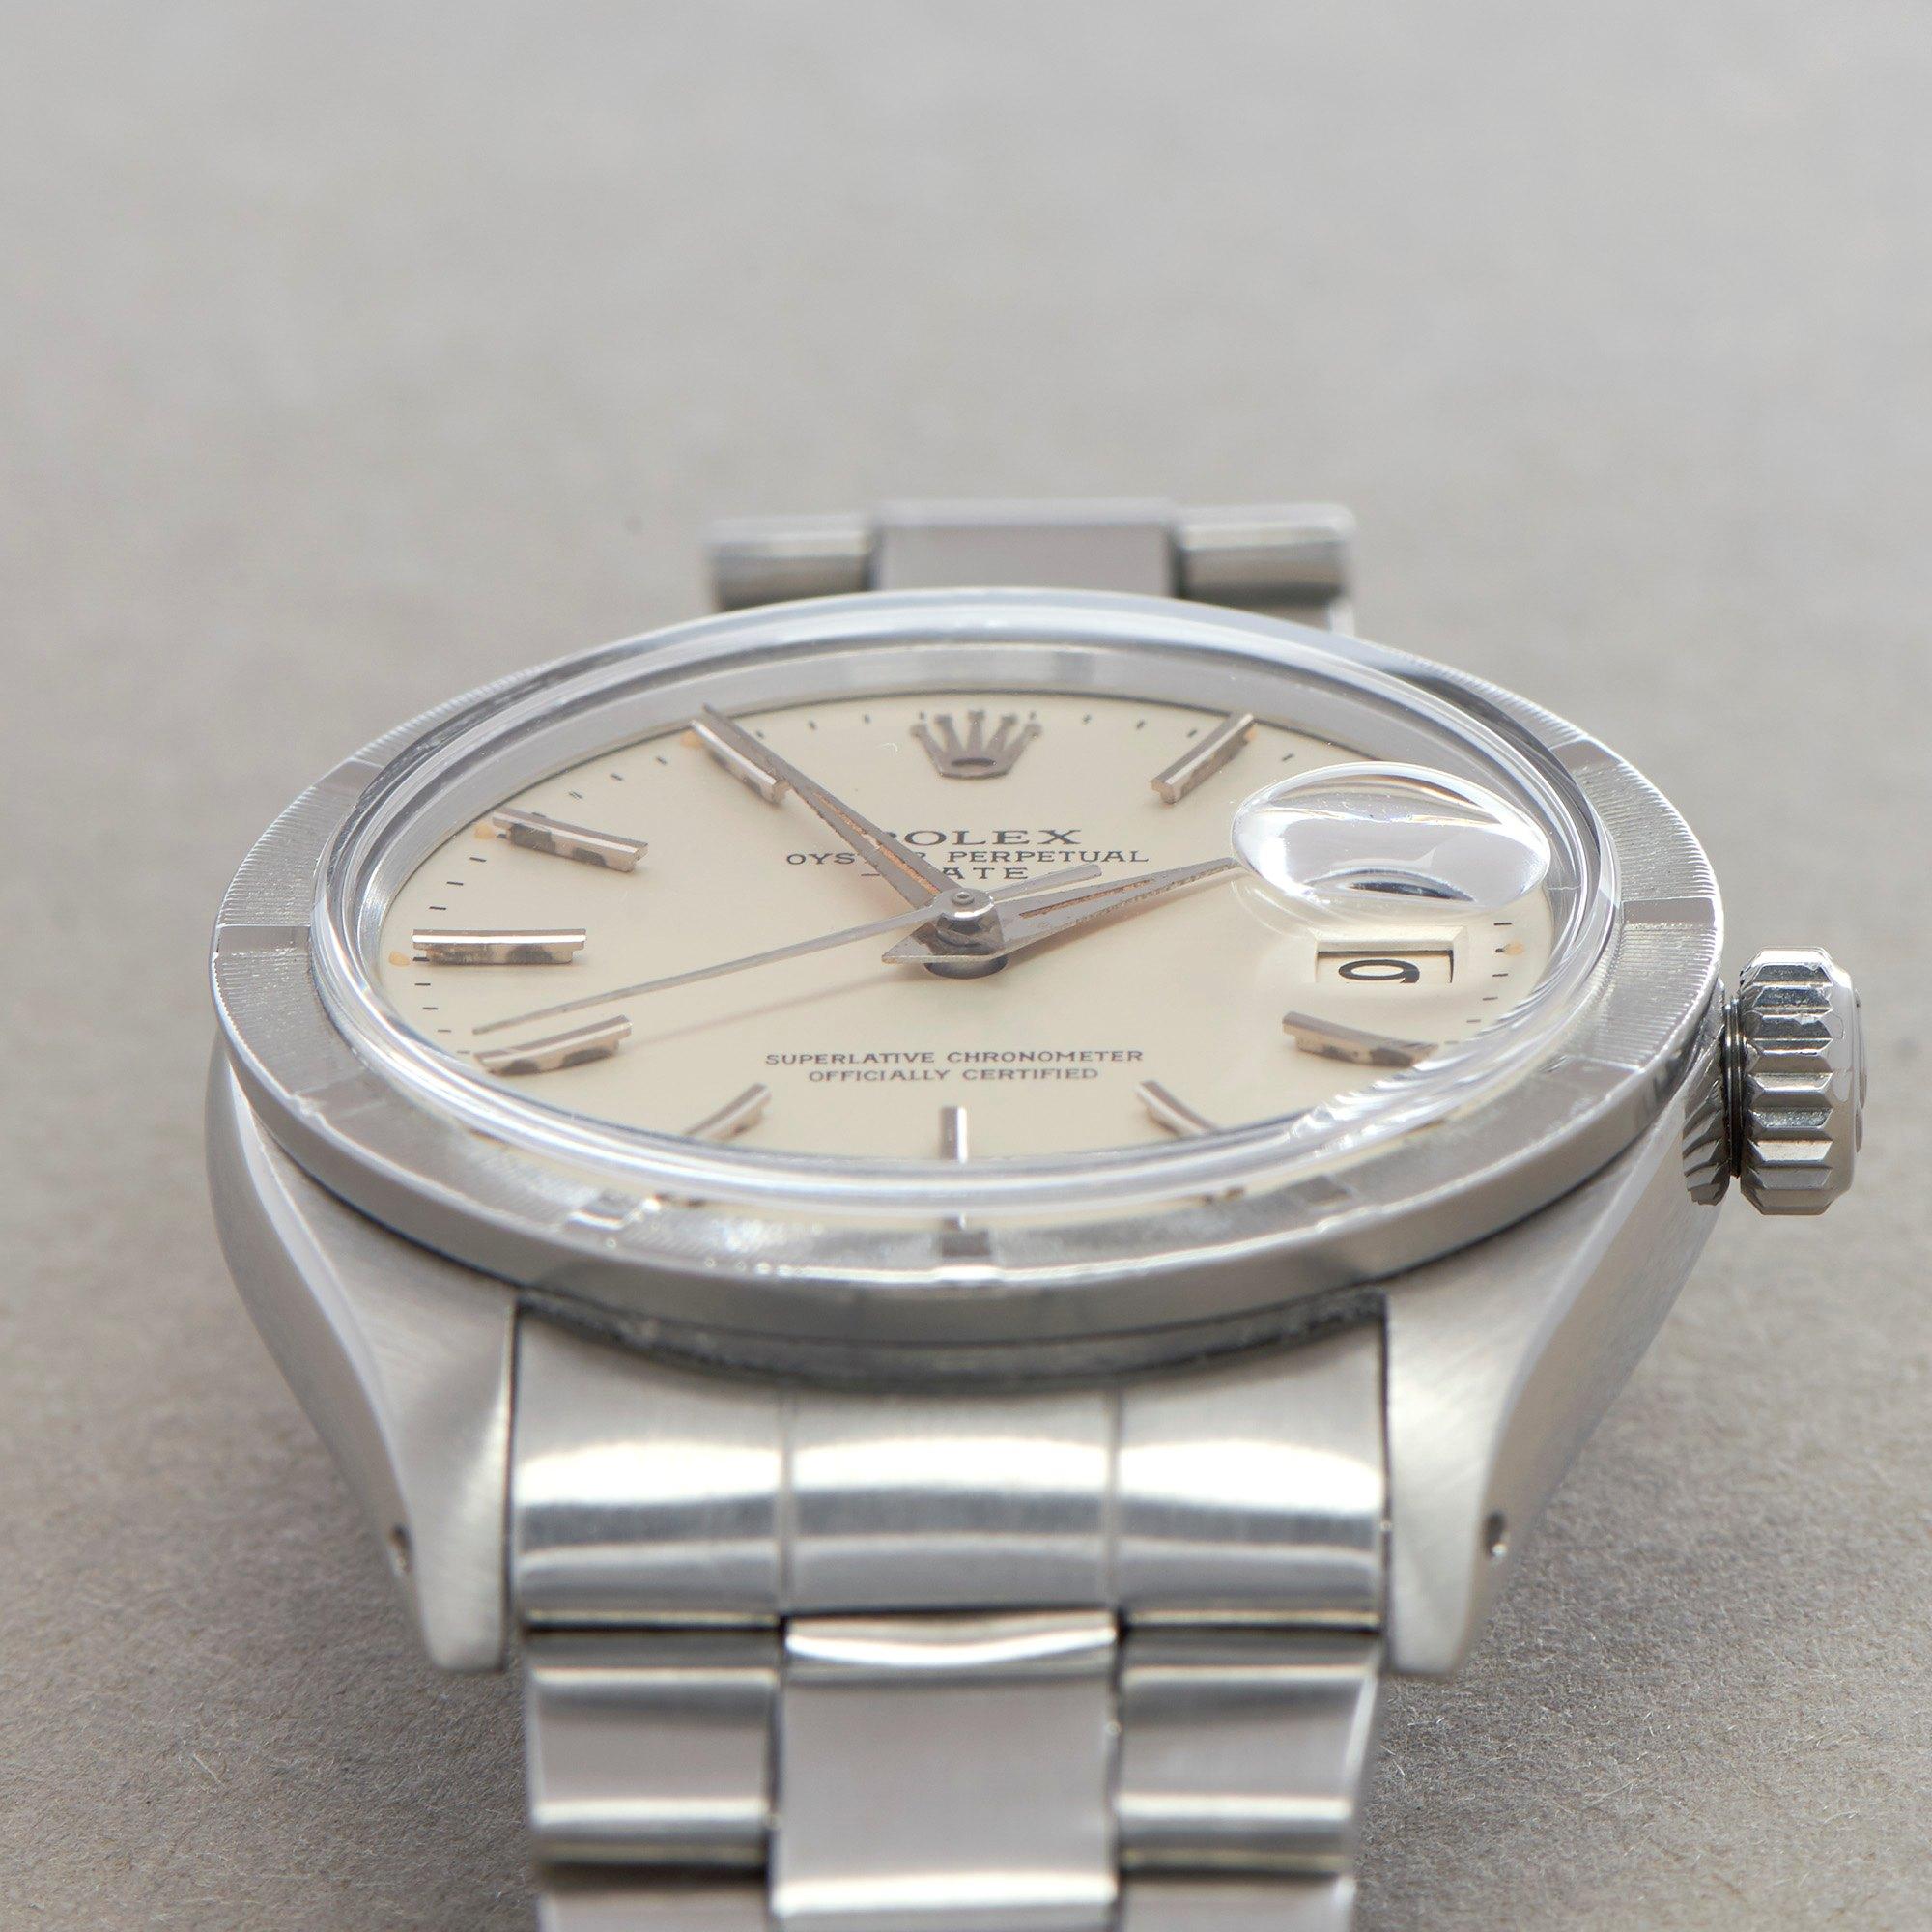 Rolex Oyster Perpetual Date 0 1501 Unisex Stainless Steel 0 Watch 3